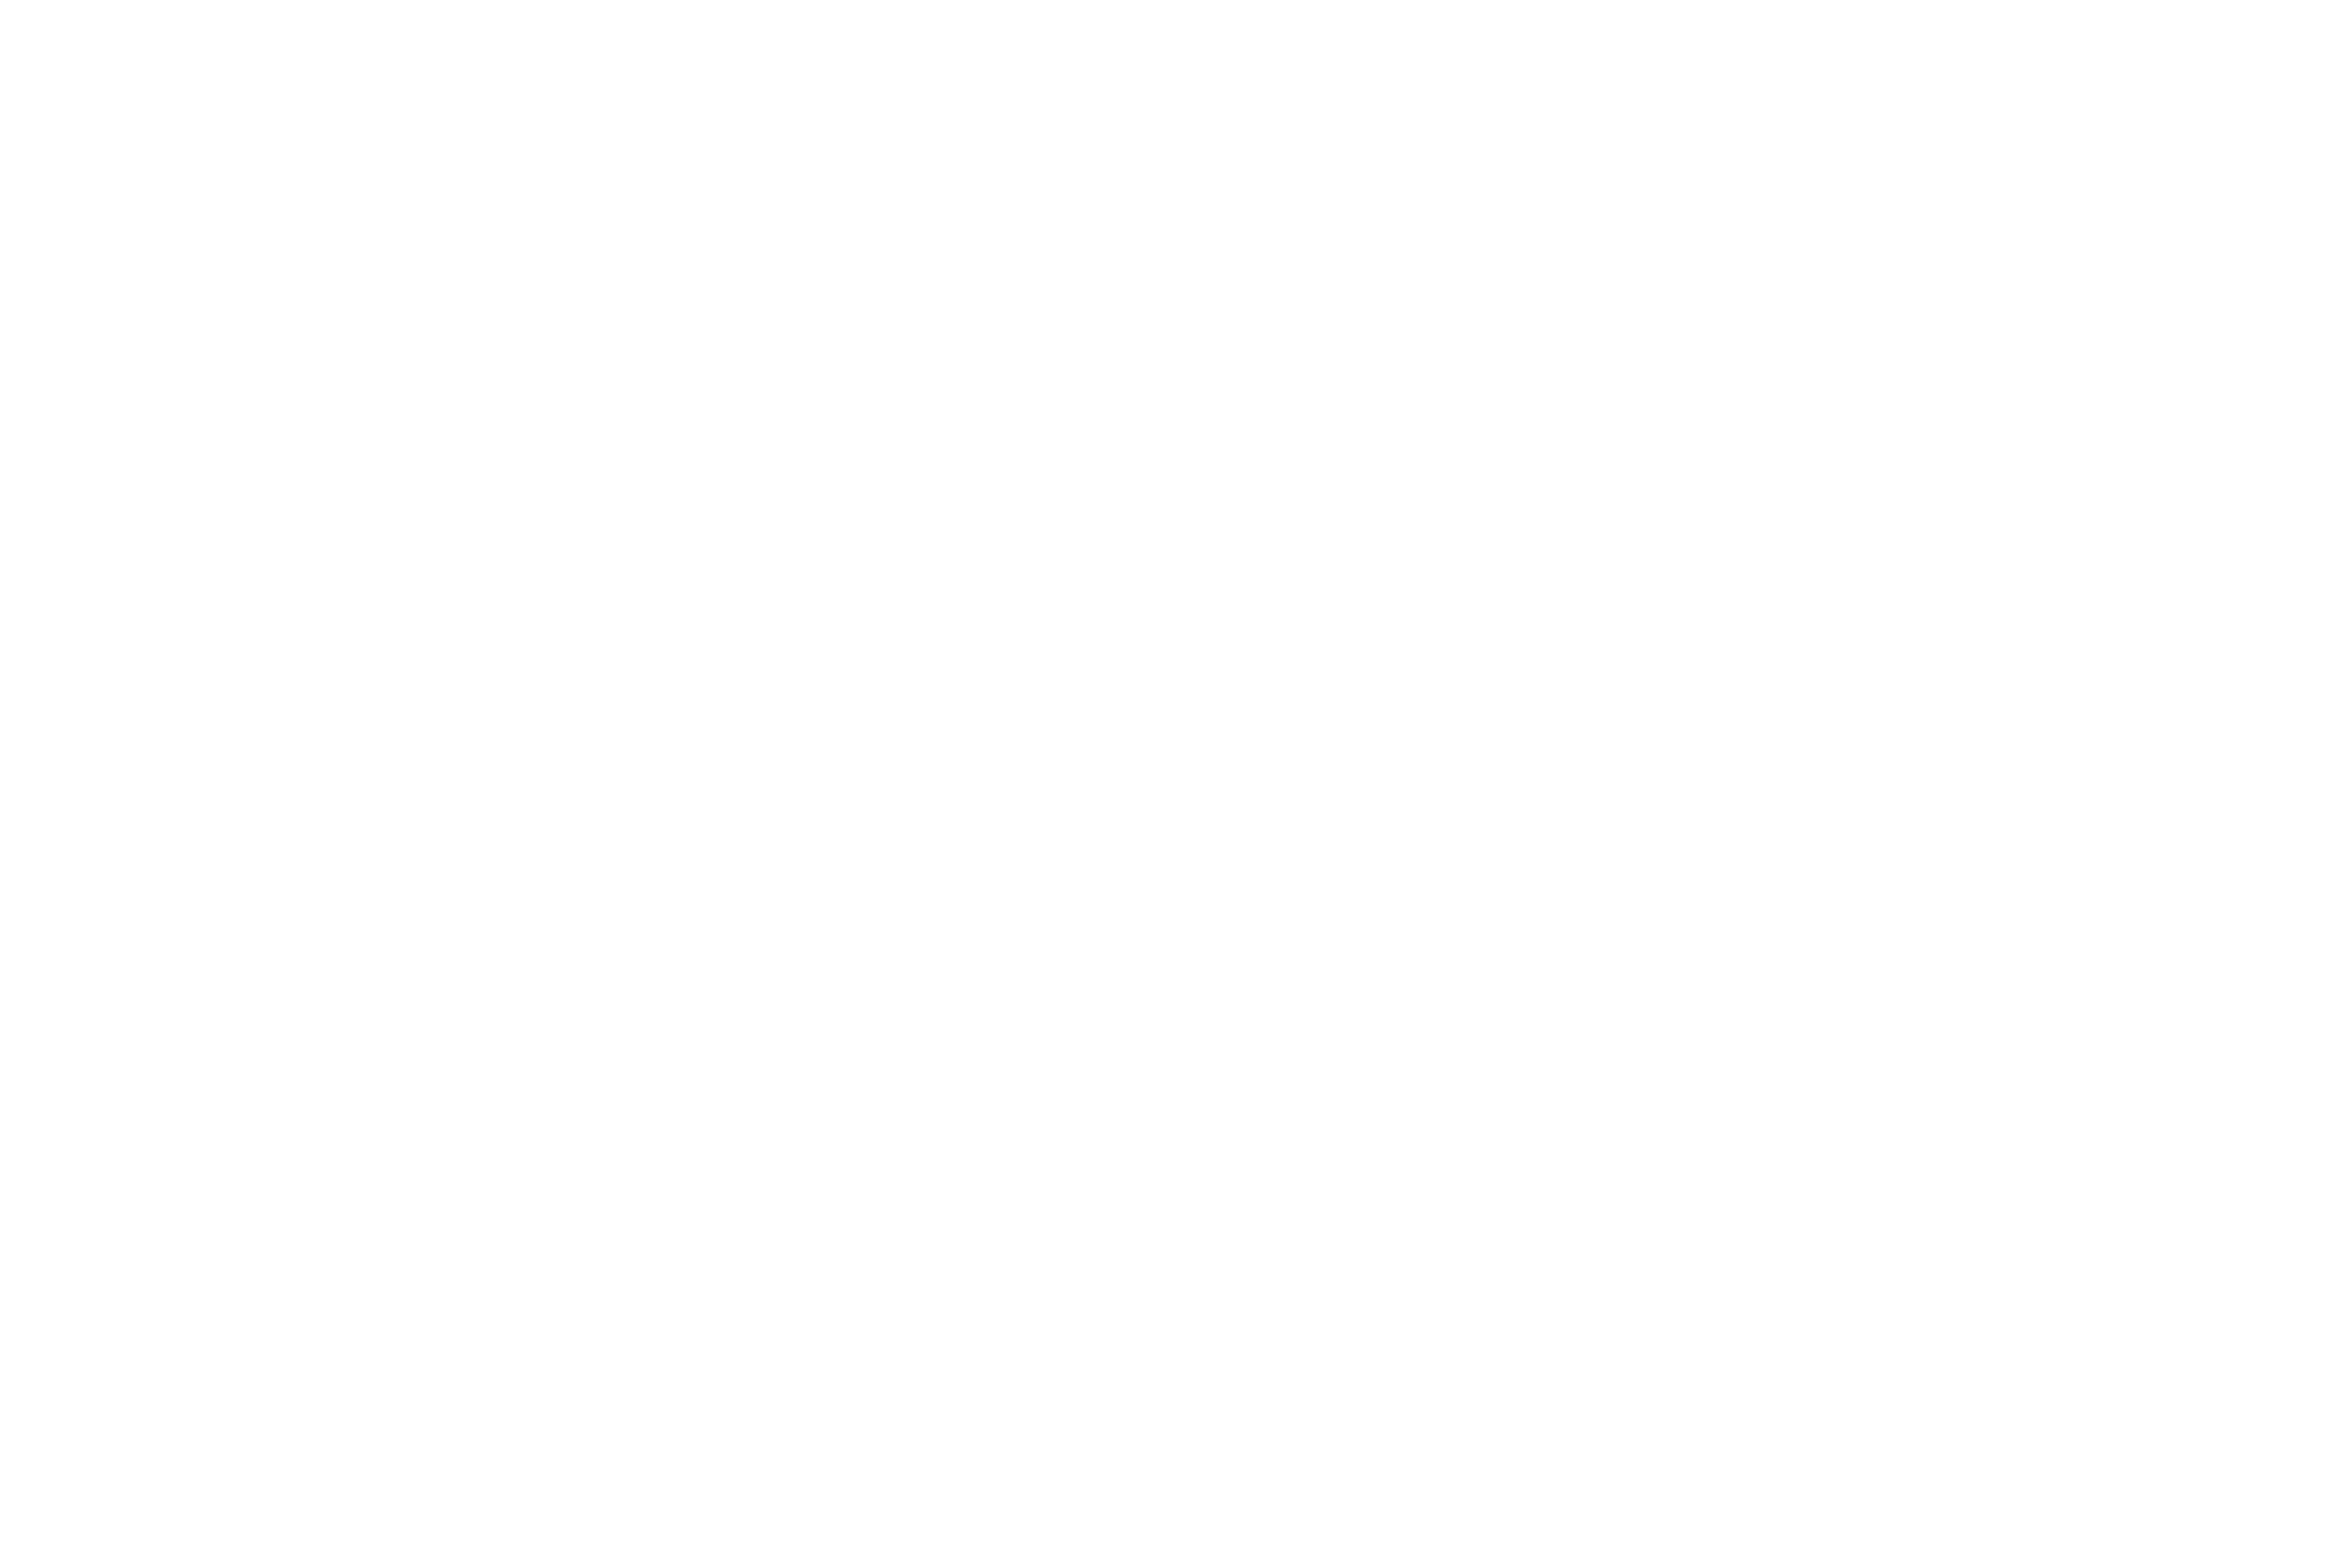 Jacuzzi Glass-House Apartments - accommodation in the heart of Krakow